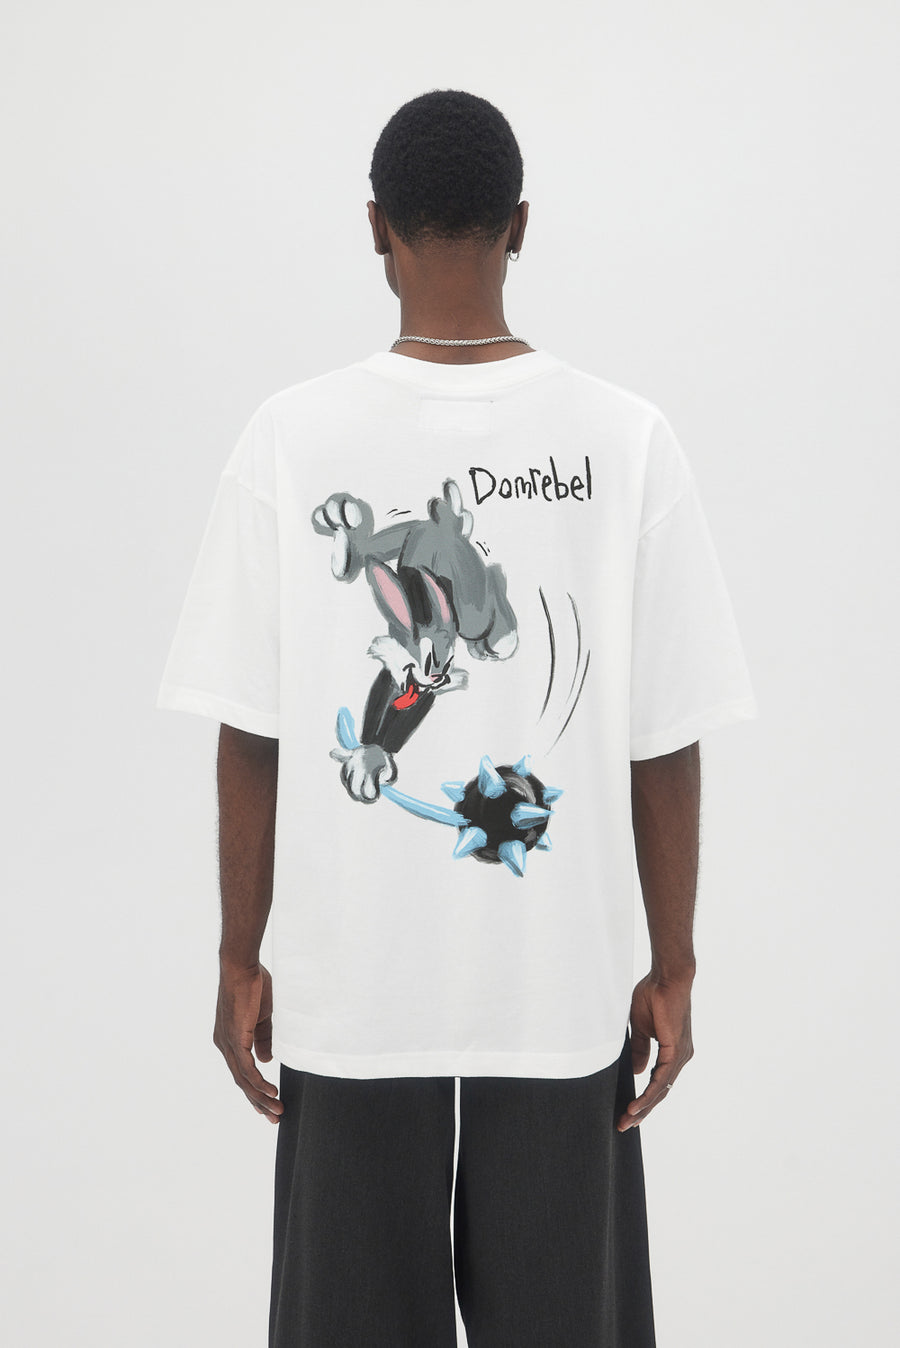 Buy the Domrebel Dizzy T-Shirt in White at Intro. Spend £50 for free UK delivery. Official stockists. We ship worldwide.